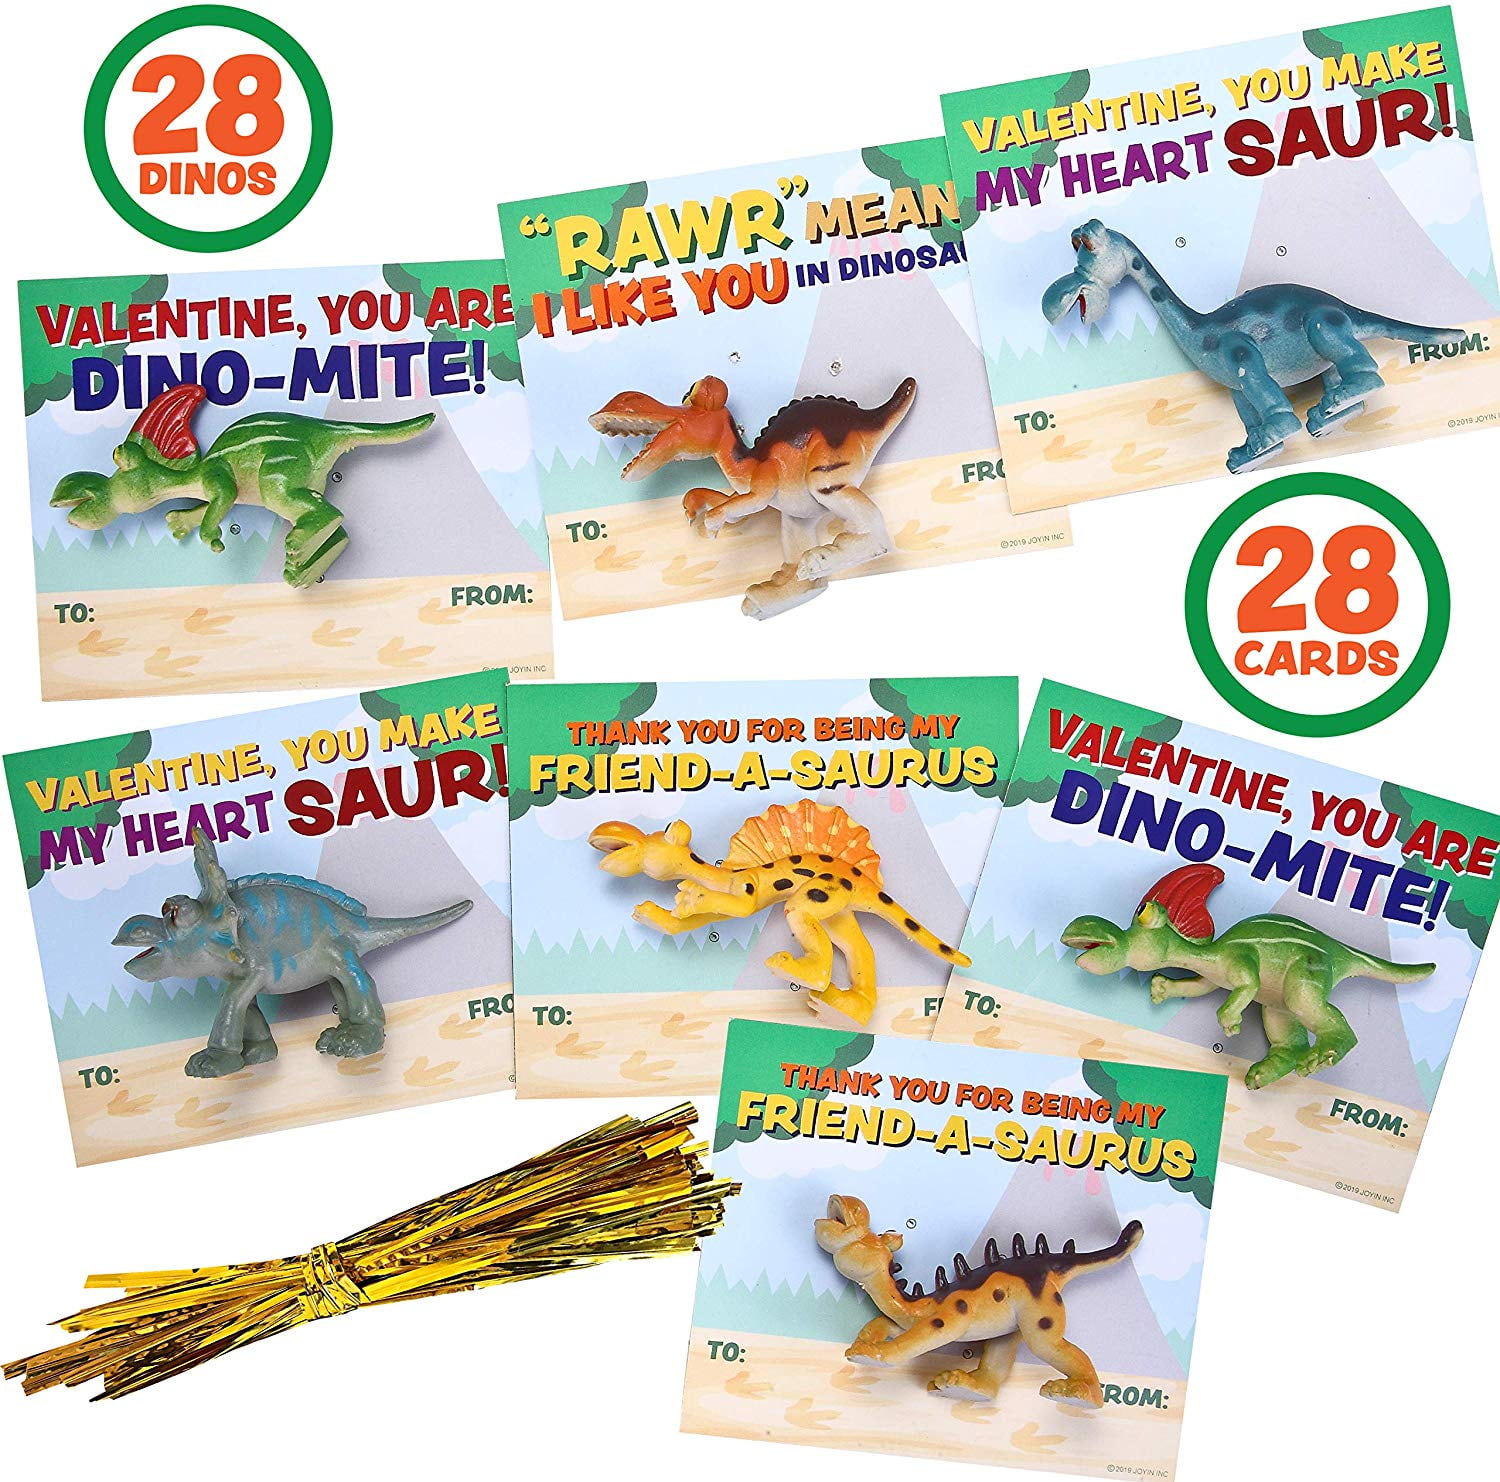 Classroom Exchange Prizes and Valentine’s Greeting Cards 28 Pack Valentines Cards and Colorful Dinosaur Crayons for Kids Valentine Gifts